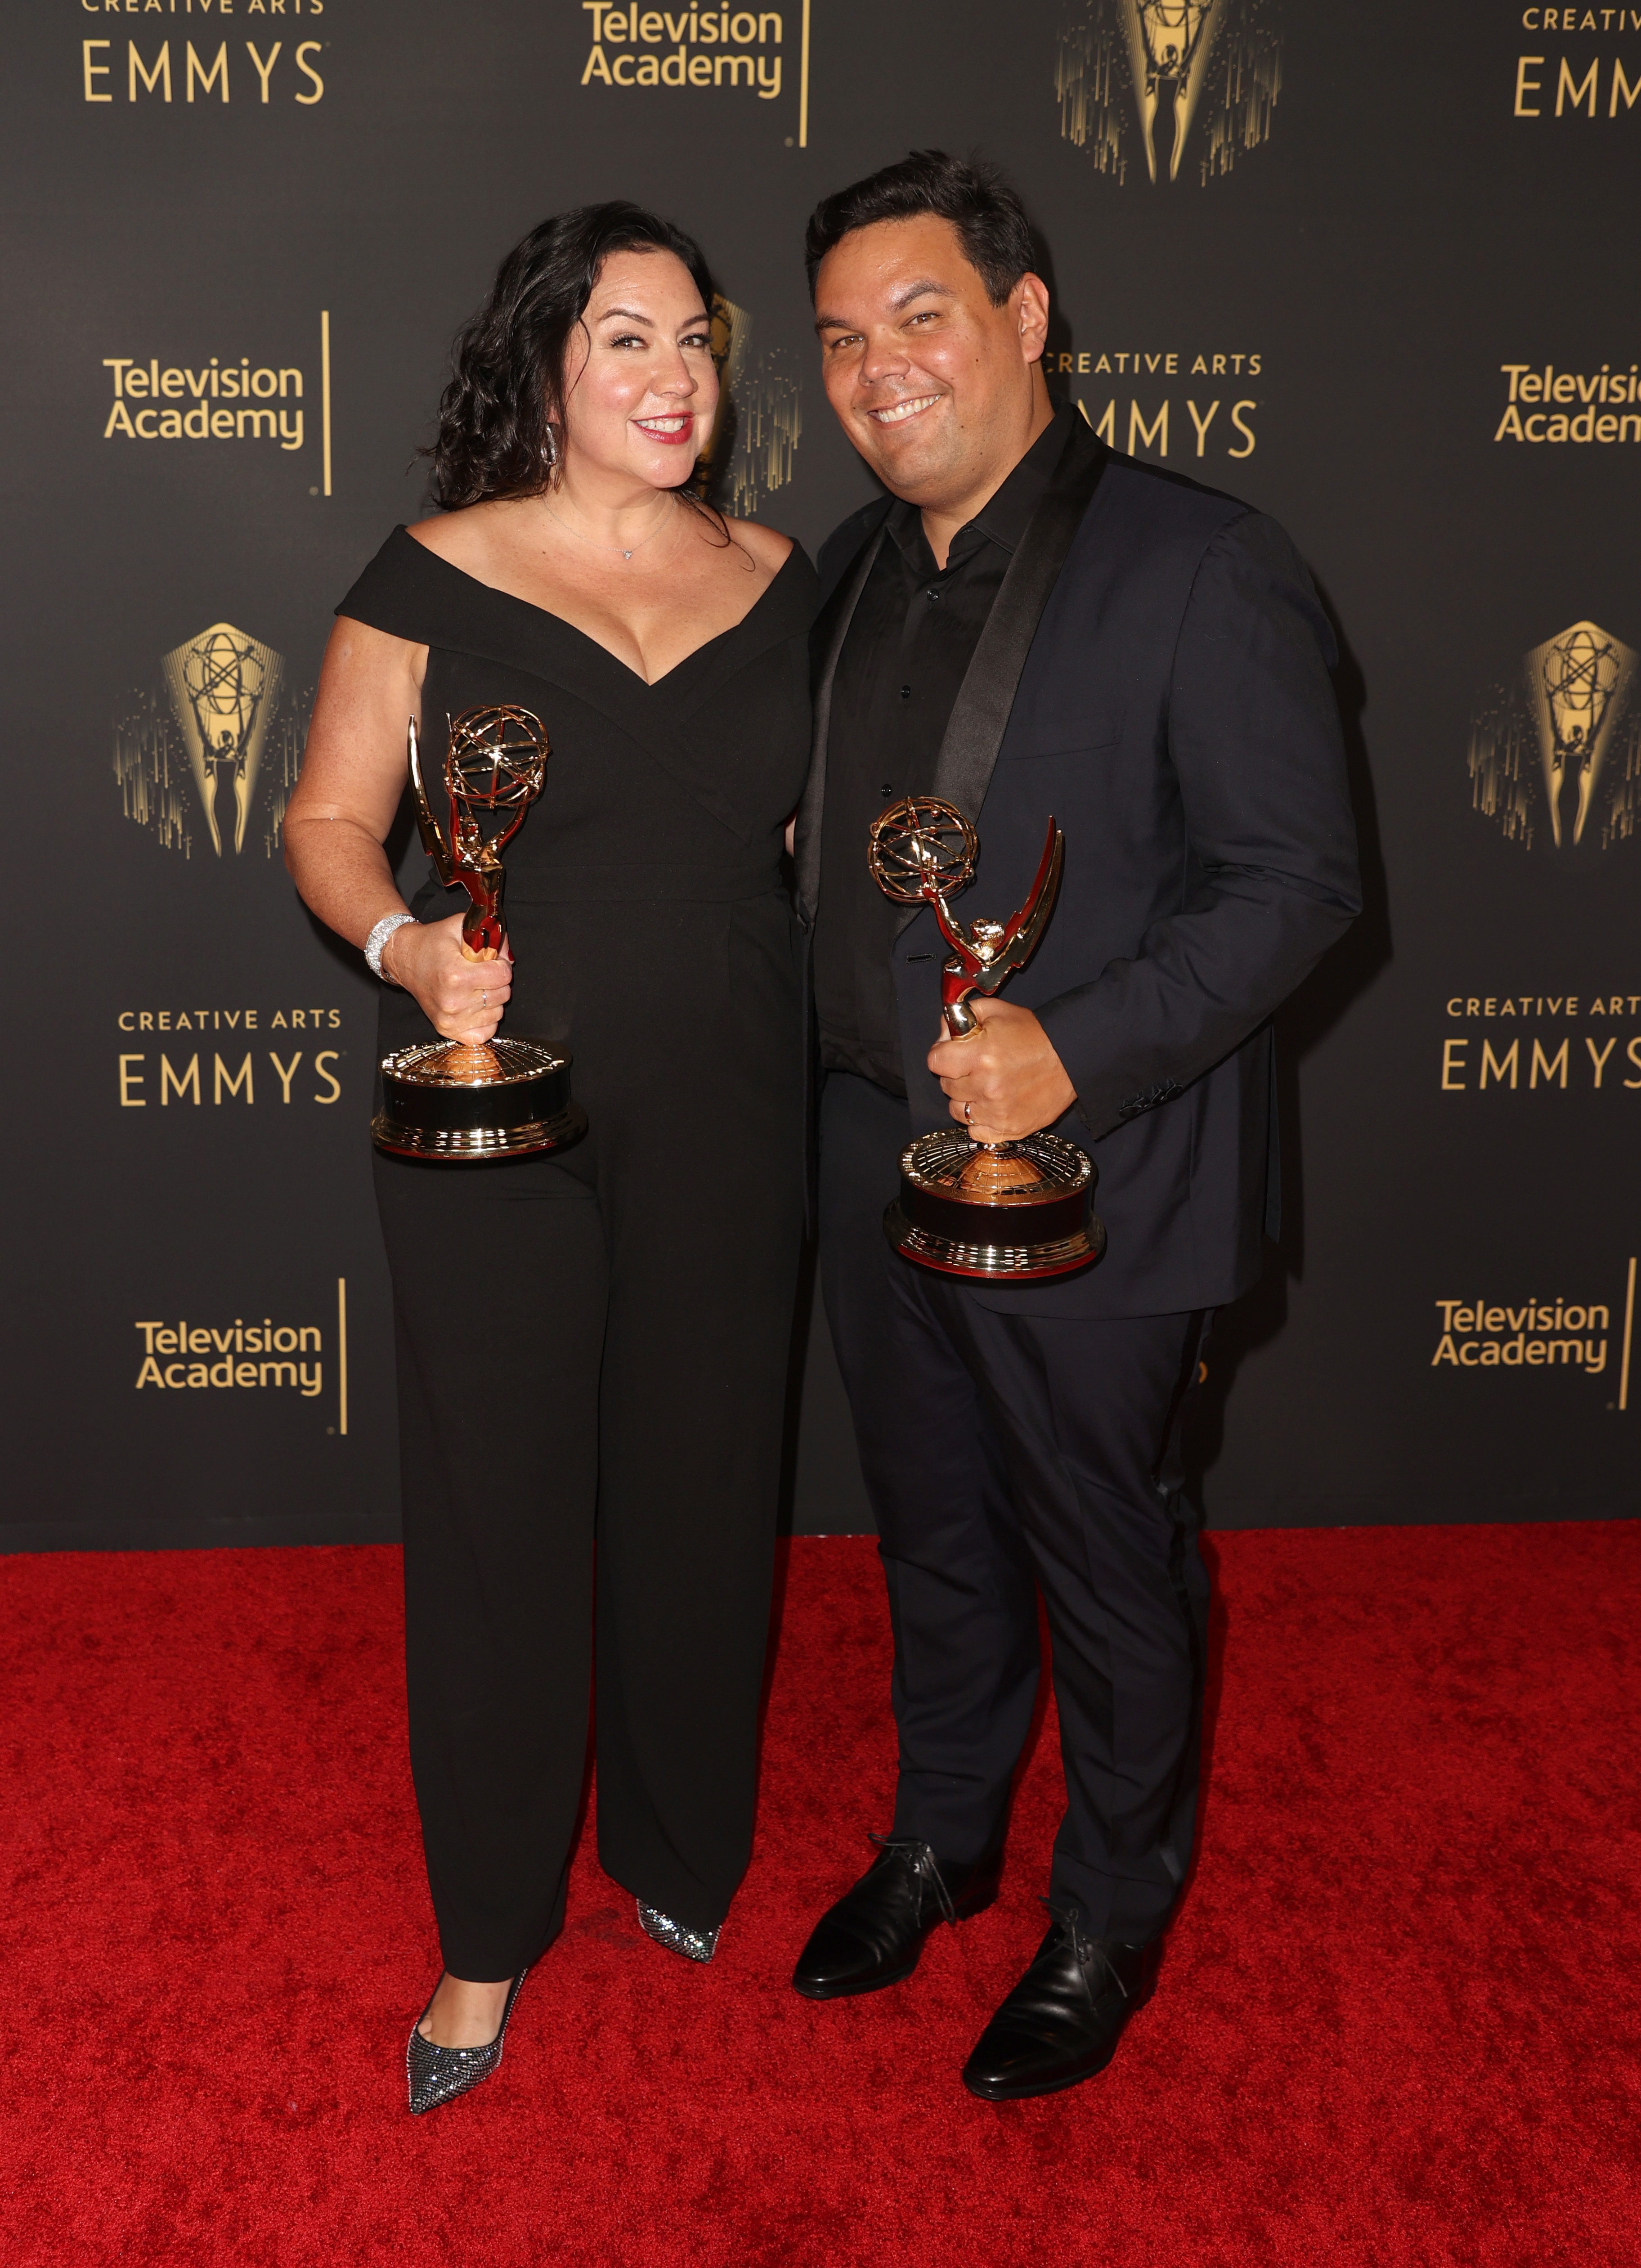 Robert Lopez and his partner holding their Emmys